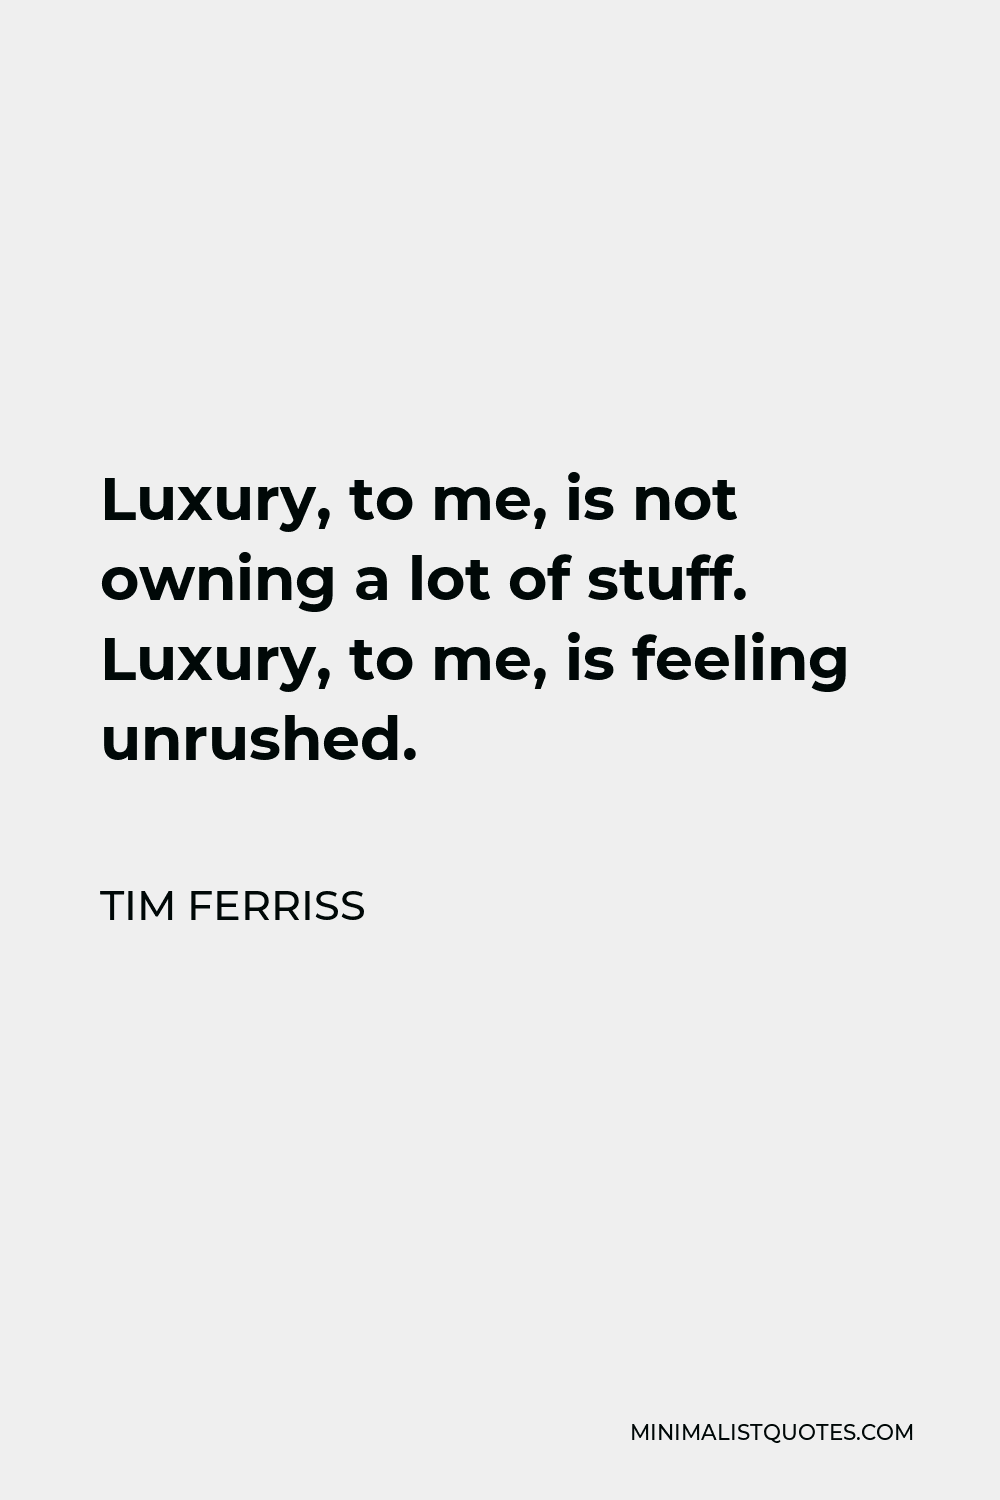 Tim Ferriss Quote - Luxury, to me, is not owning a lot of stuff. Luxury, to me, is feeling unrushed.